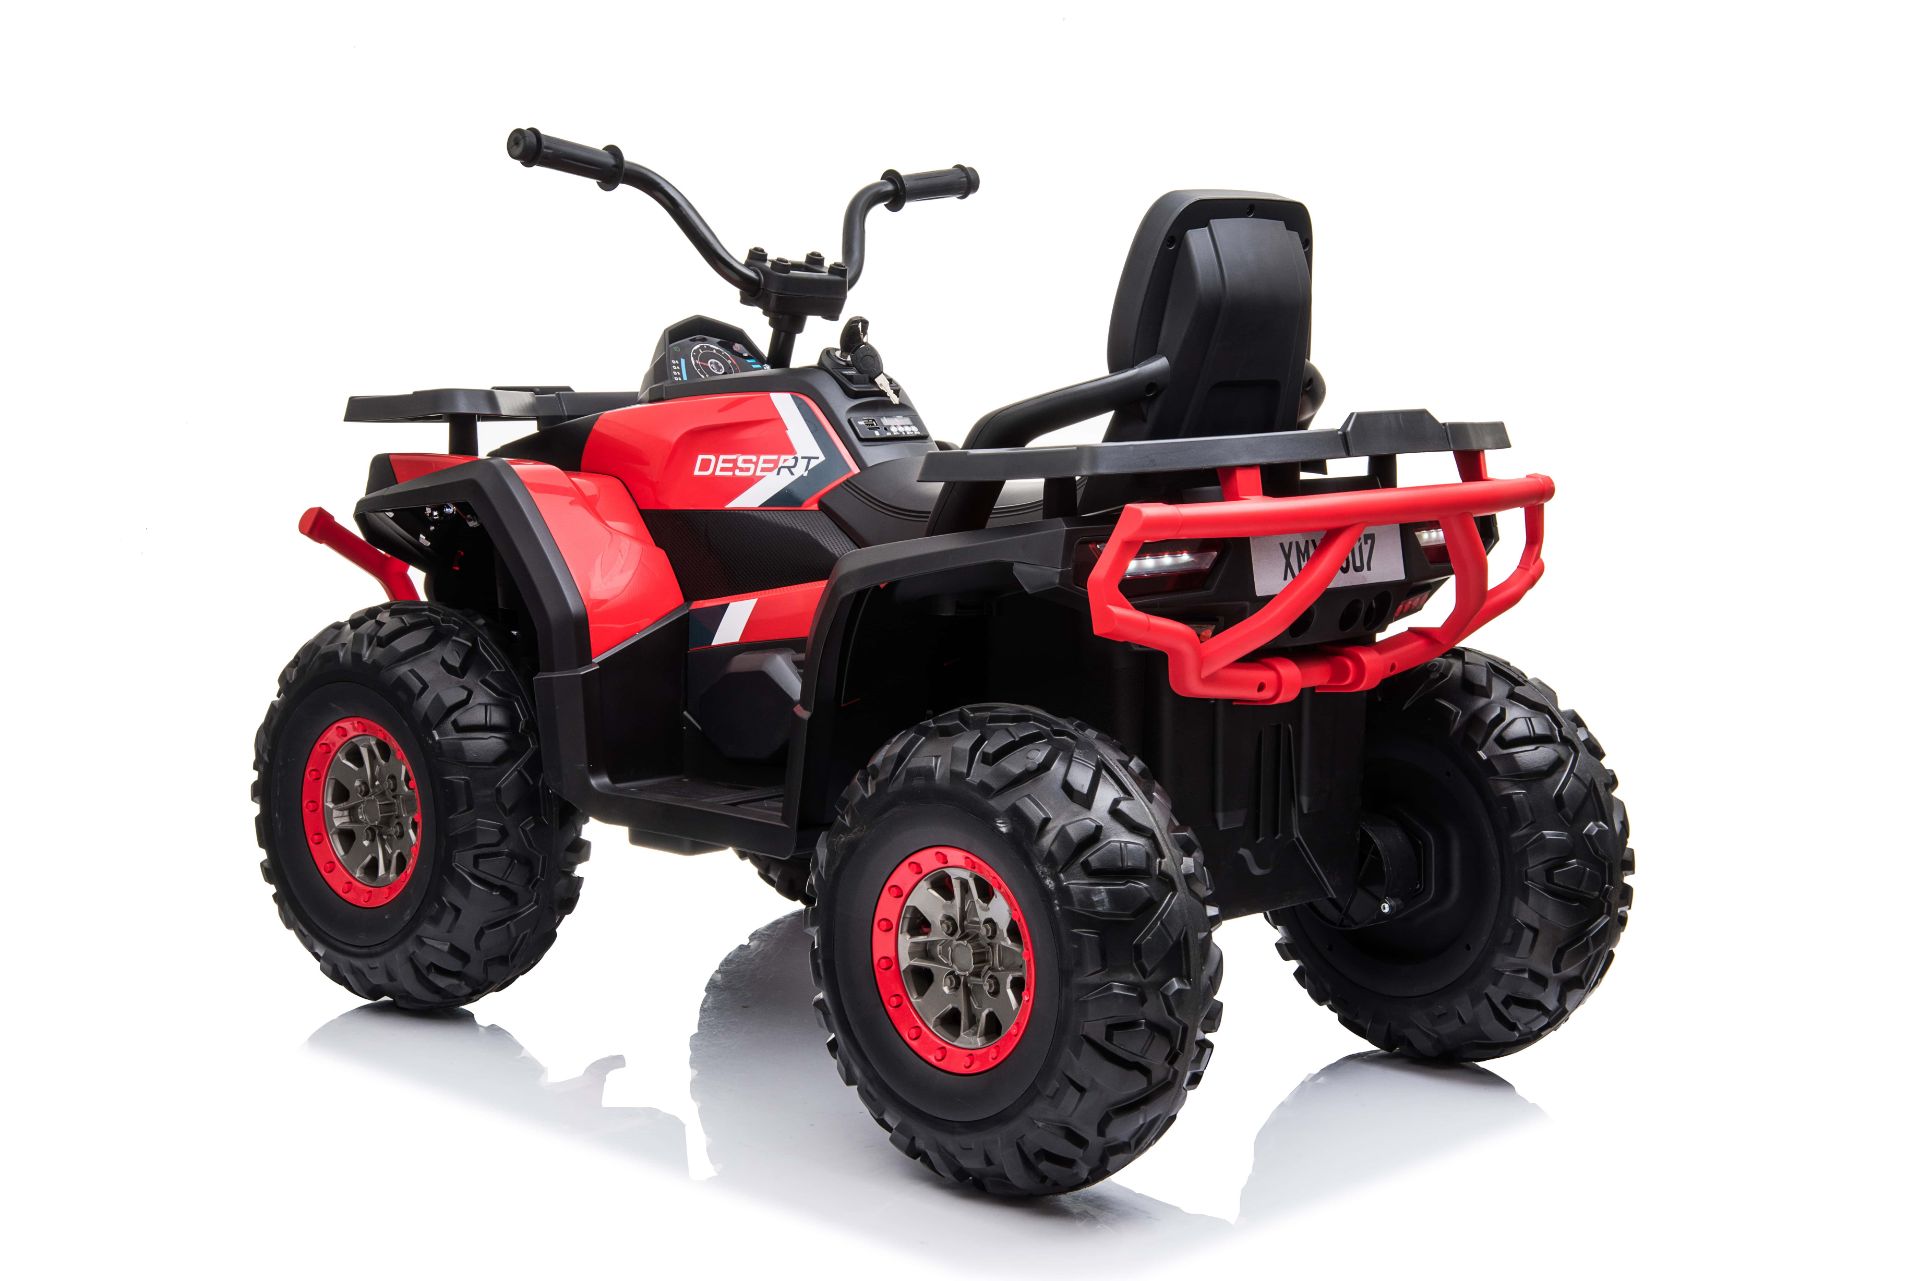 4 x Brand New Ride On Childs Quad Bike 12v with Parental Remote Control - Image 2 of 10